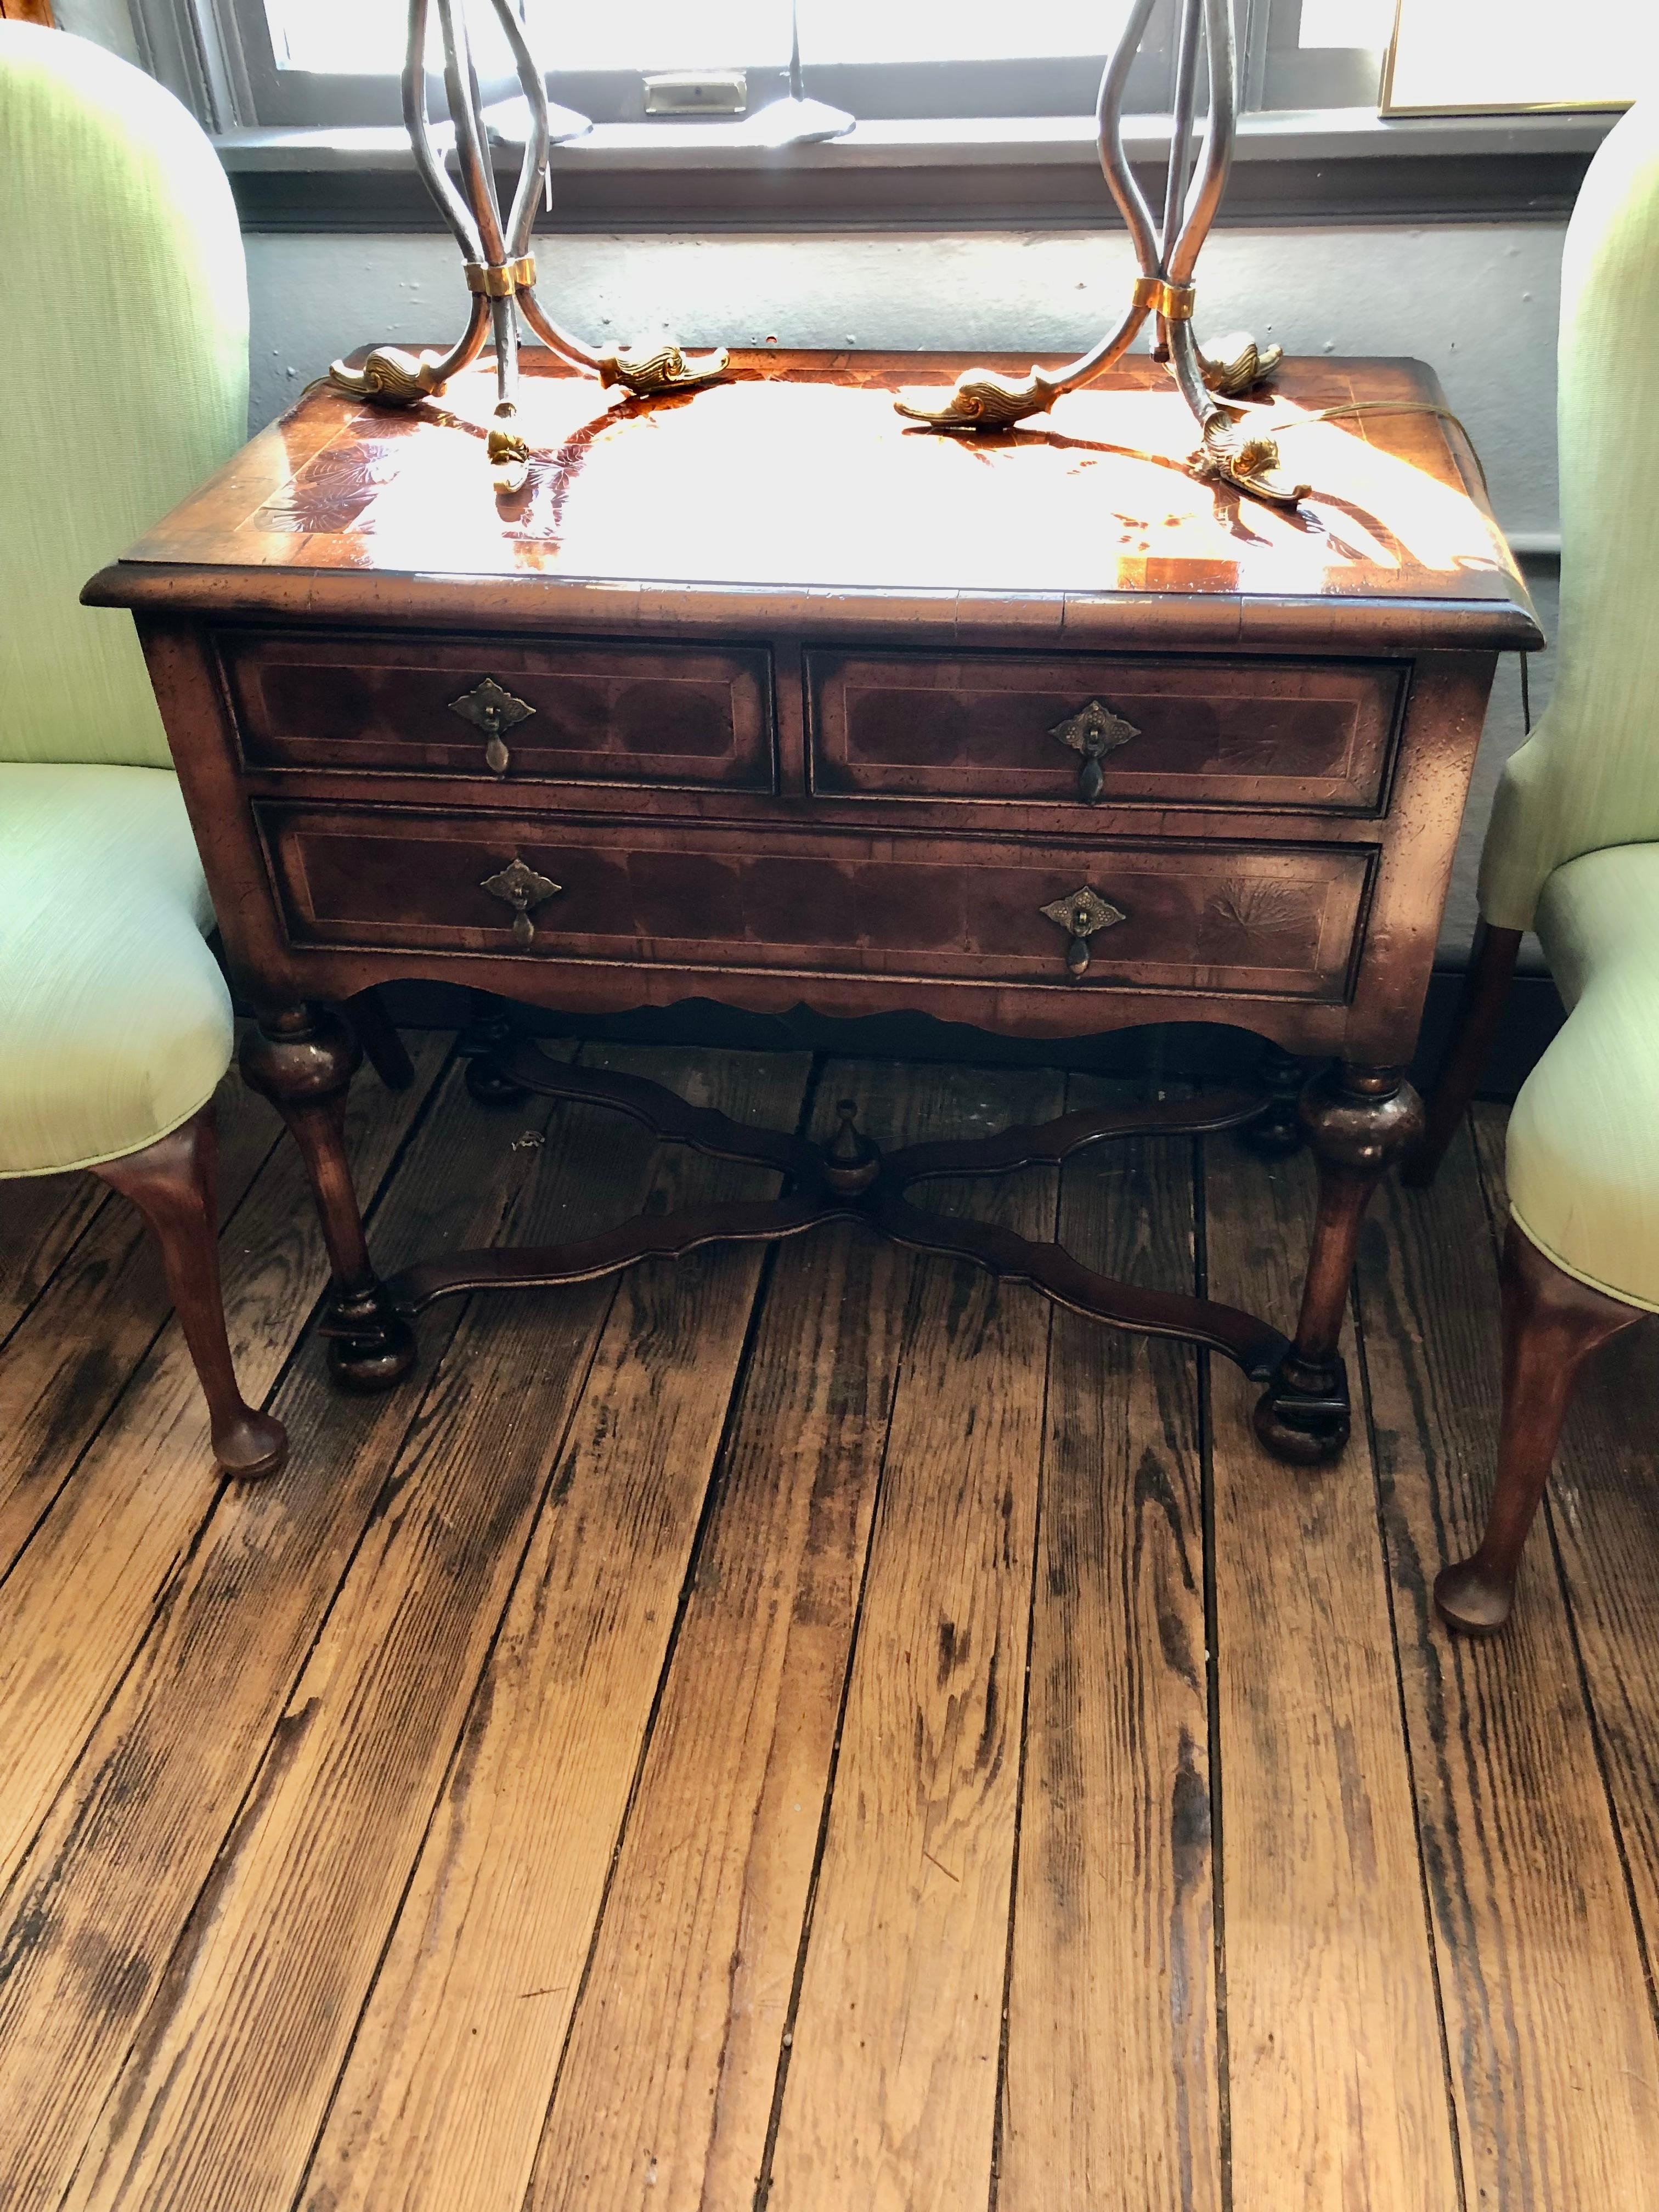 Gorgeous and unusual oyster wood lowboy chest of drawers having richly inlaid top with aged patina and craquelure.  3 drawers and handsome matte brasses as well as turned legs and stretcher with decorative finial.